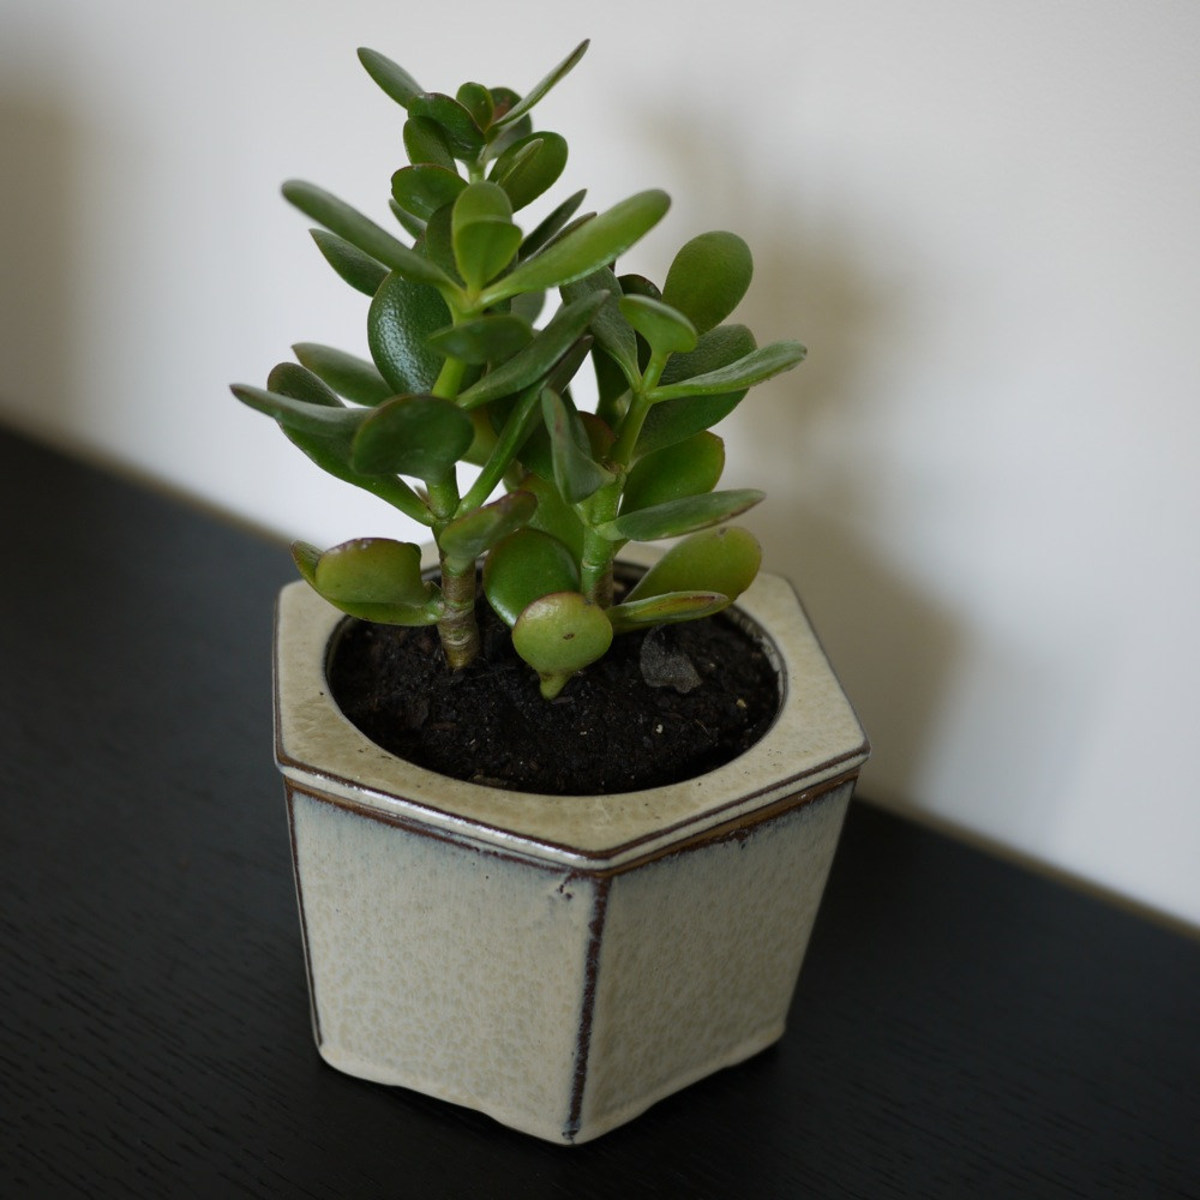 plant jade care indoor green succulent year stays fantastic round